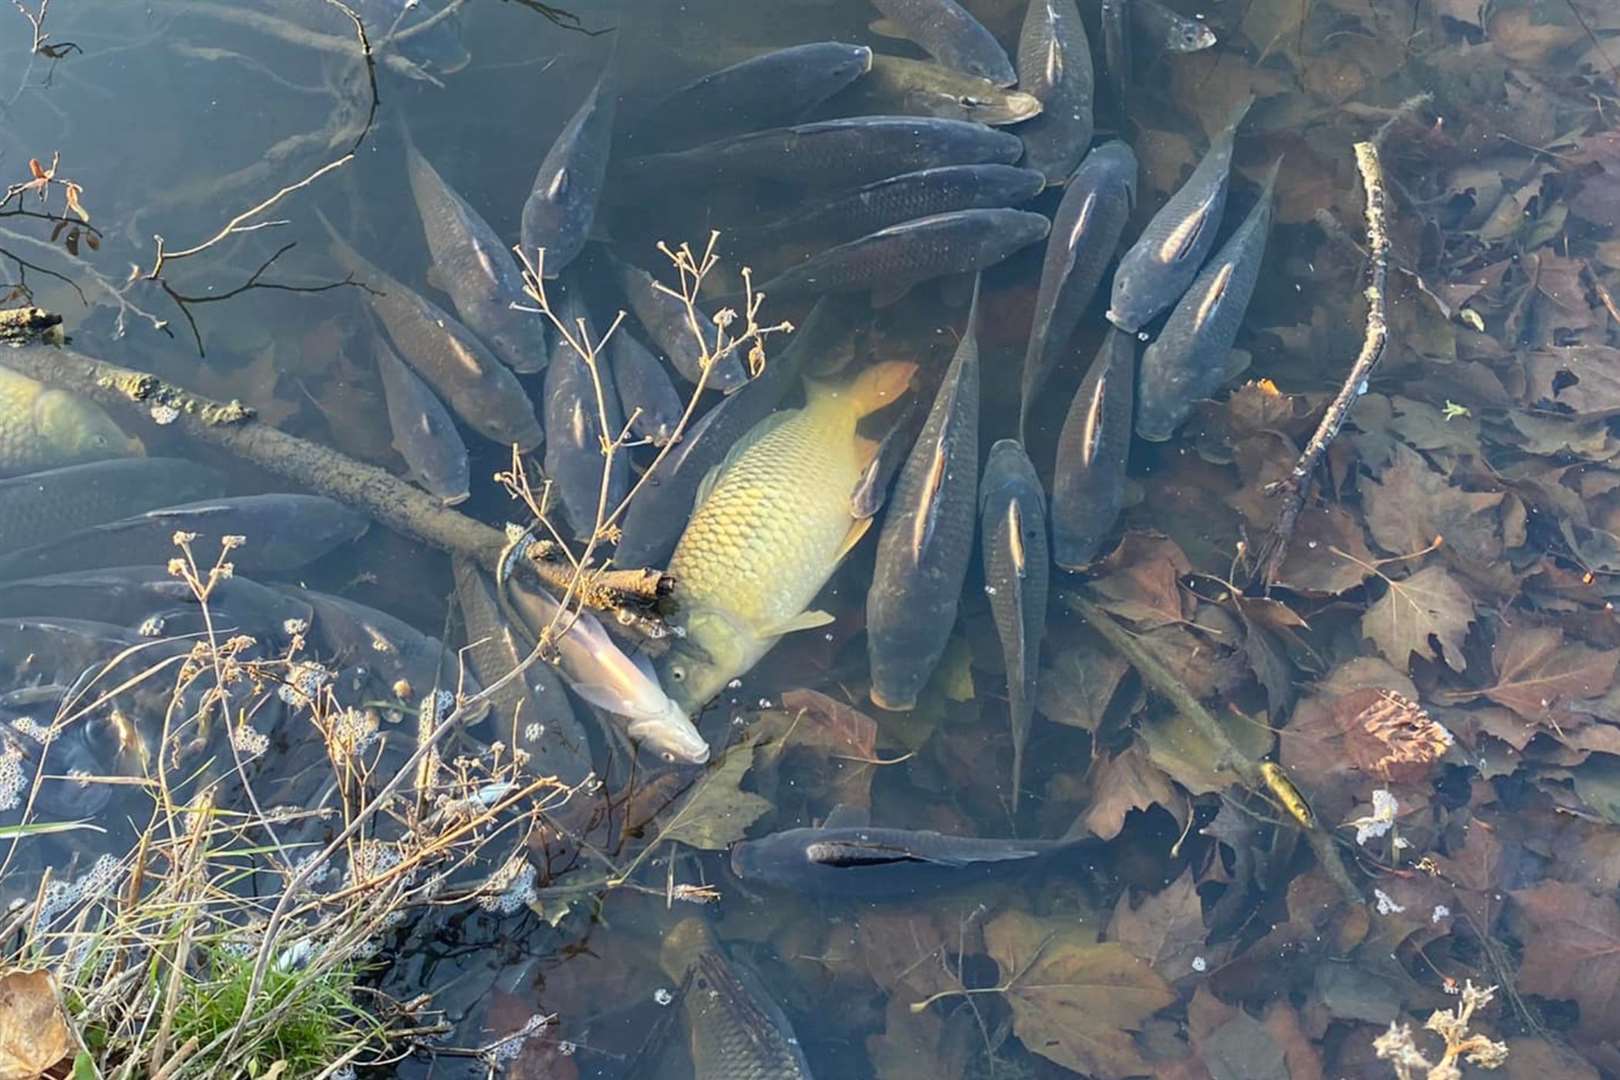 A number of fish were found gasping for air in water near The Butts, Sandwich